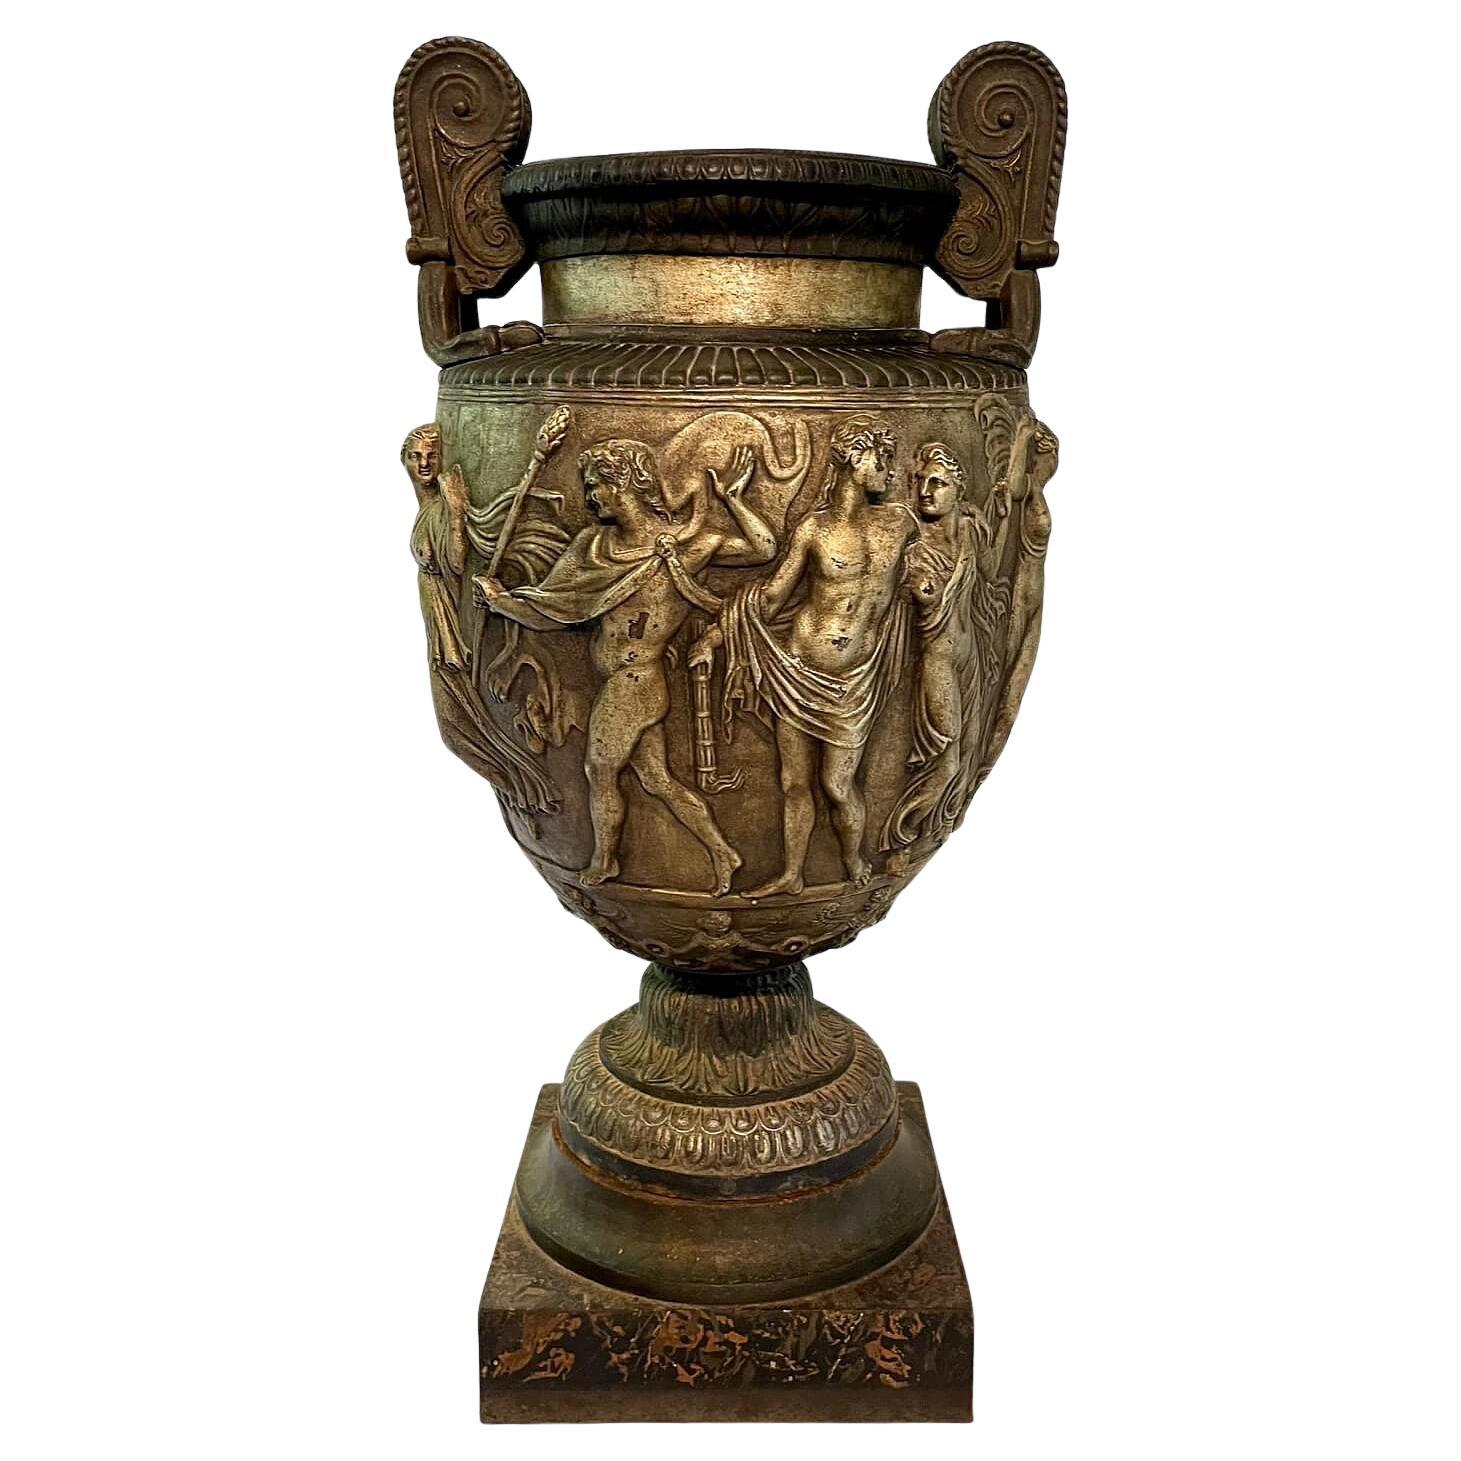 Cast Iron Scale Model of the Townley Vase, Val d'Osne Foundry, circa 1870